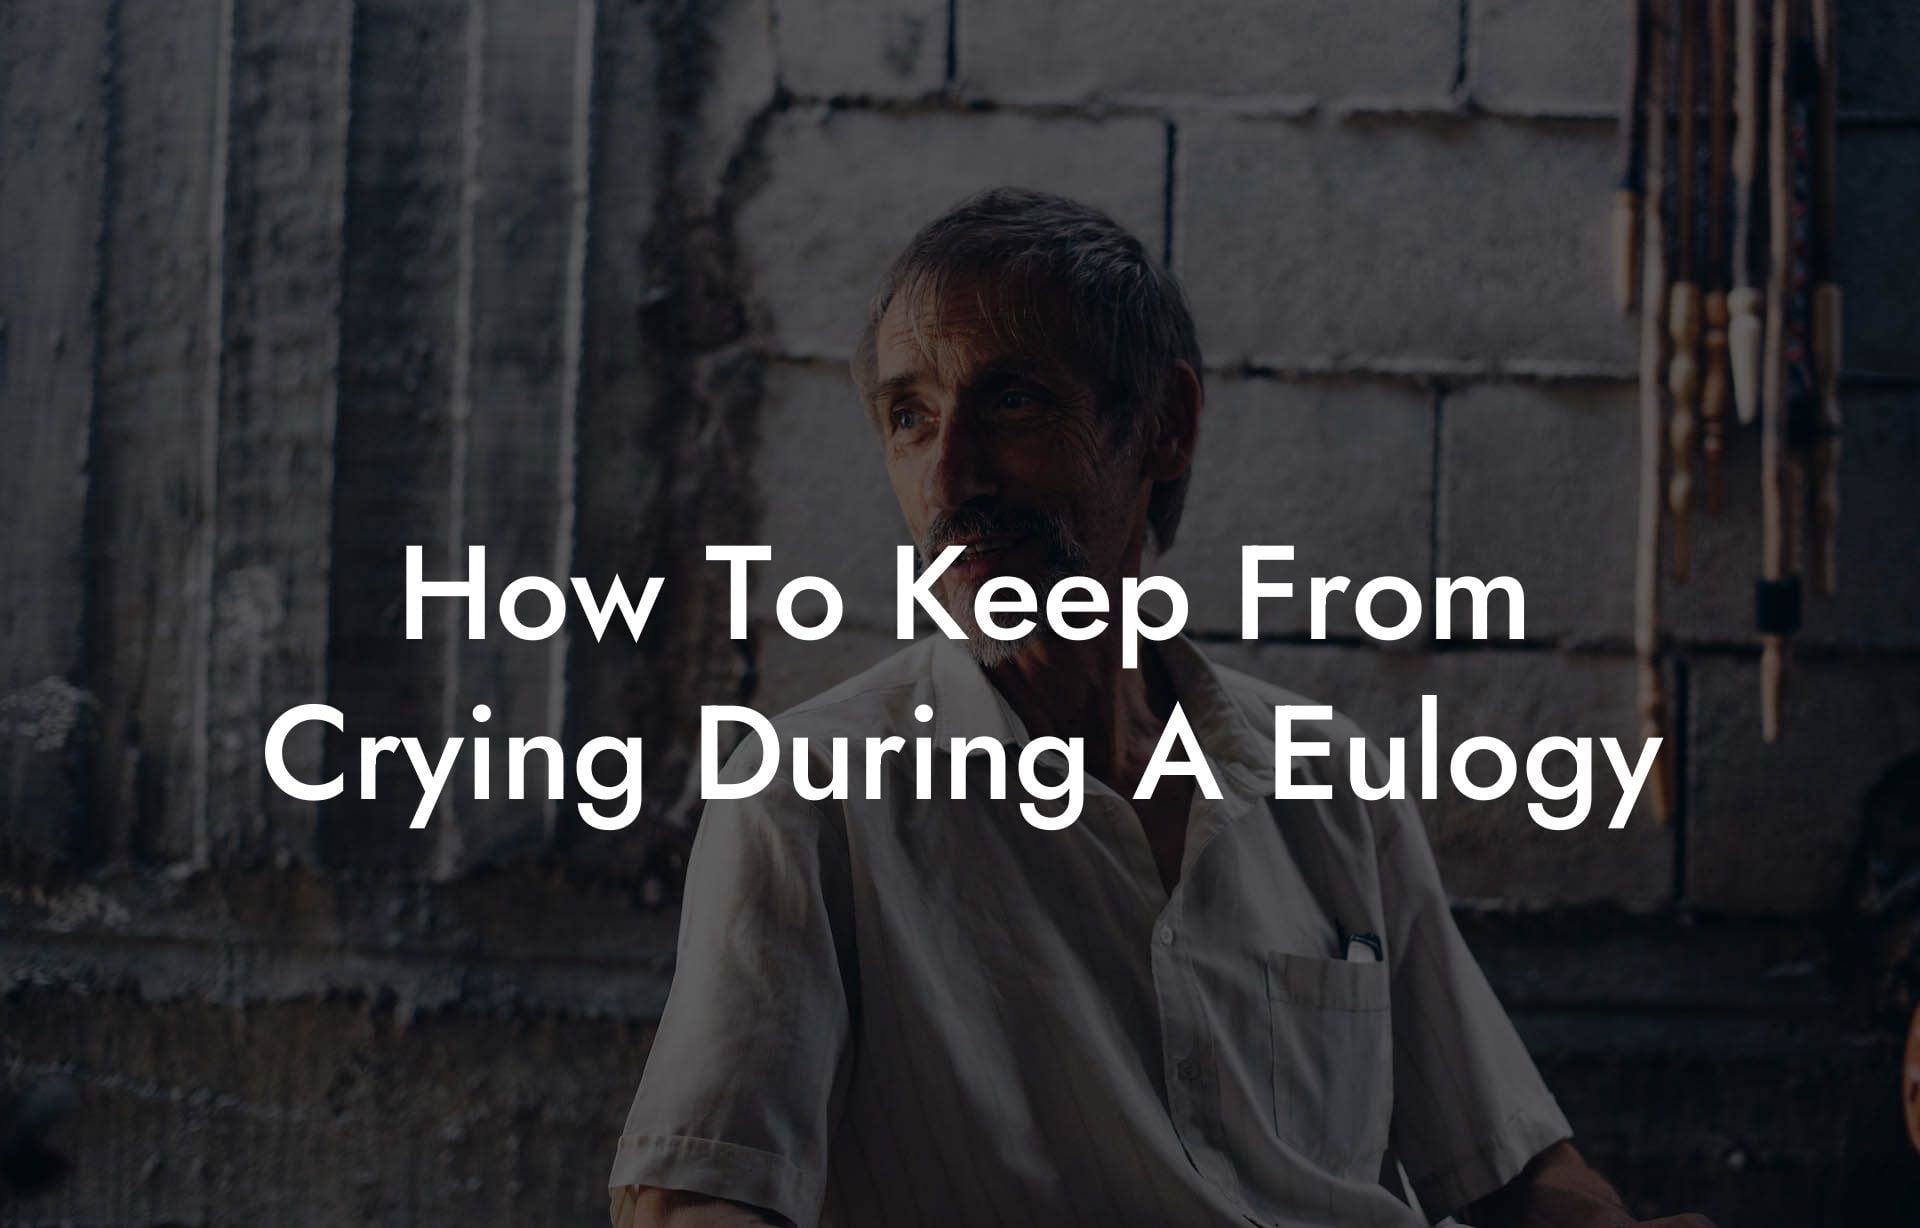 How To Keep From Crying During A Eulogy